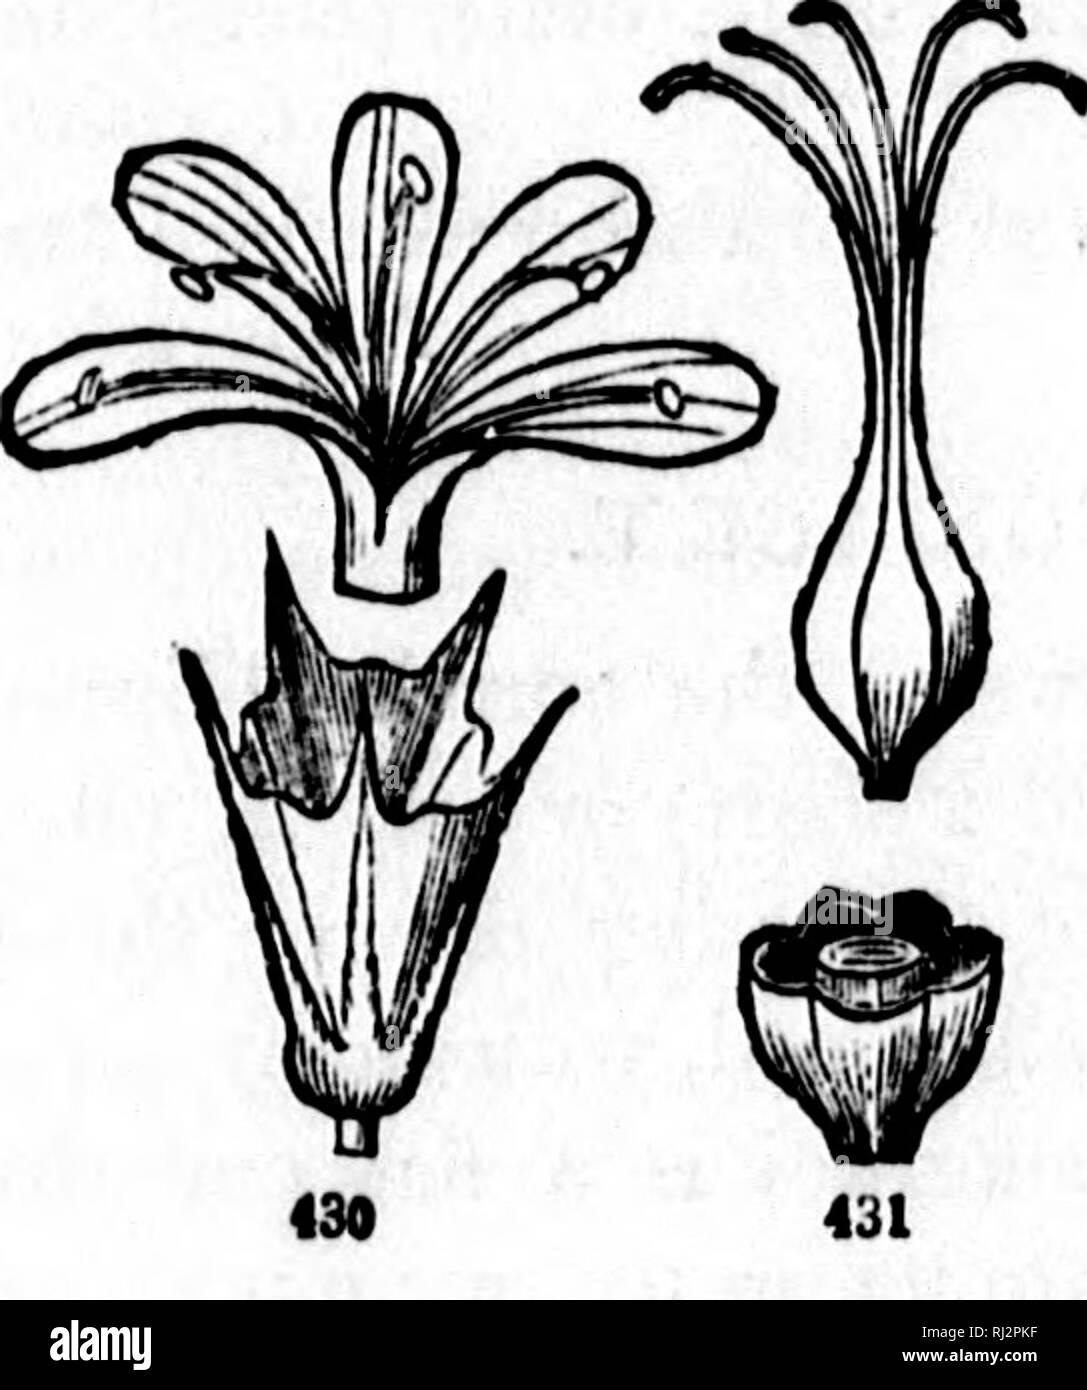 . How plants grow [microform] : a simple introduction to structural botany : with a popular flora, or an arrangement and description of common plants, both wild and cultivated : illustrated by 500 wood engravings. Botany; Botanique. POPULAR FLORA. 173. 428 Pn- blU on tlia 67. LEADWORT FAMILY. Order PLUMBAGINACEiE. Familiar to us in two plants only, viz. Marsii-Rosemary on the coast, and Thrift in gardens; known by having a dry and scaly funnel-shaped calyx, and 5 petals united only at their base, with a stamen before each, and 5 styles on a single one-seeded ovary. Flowers (rose-color) in a ro Stock Photo